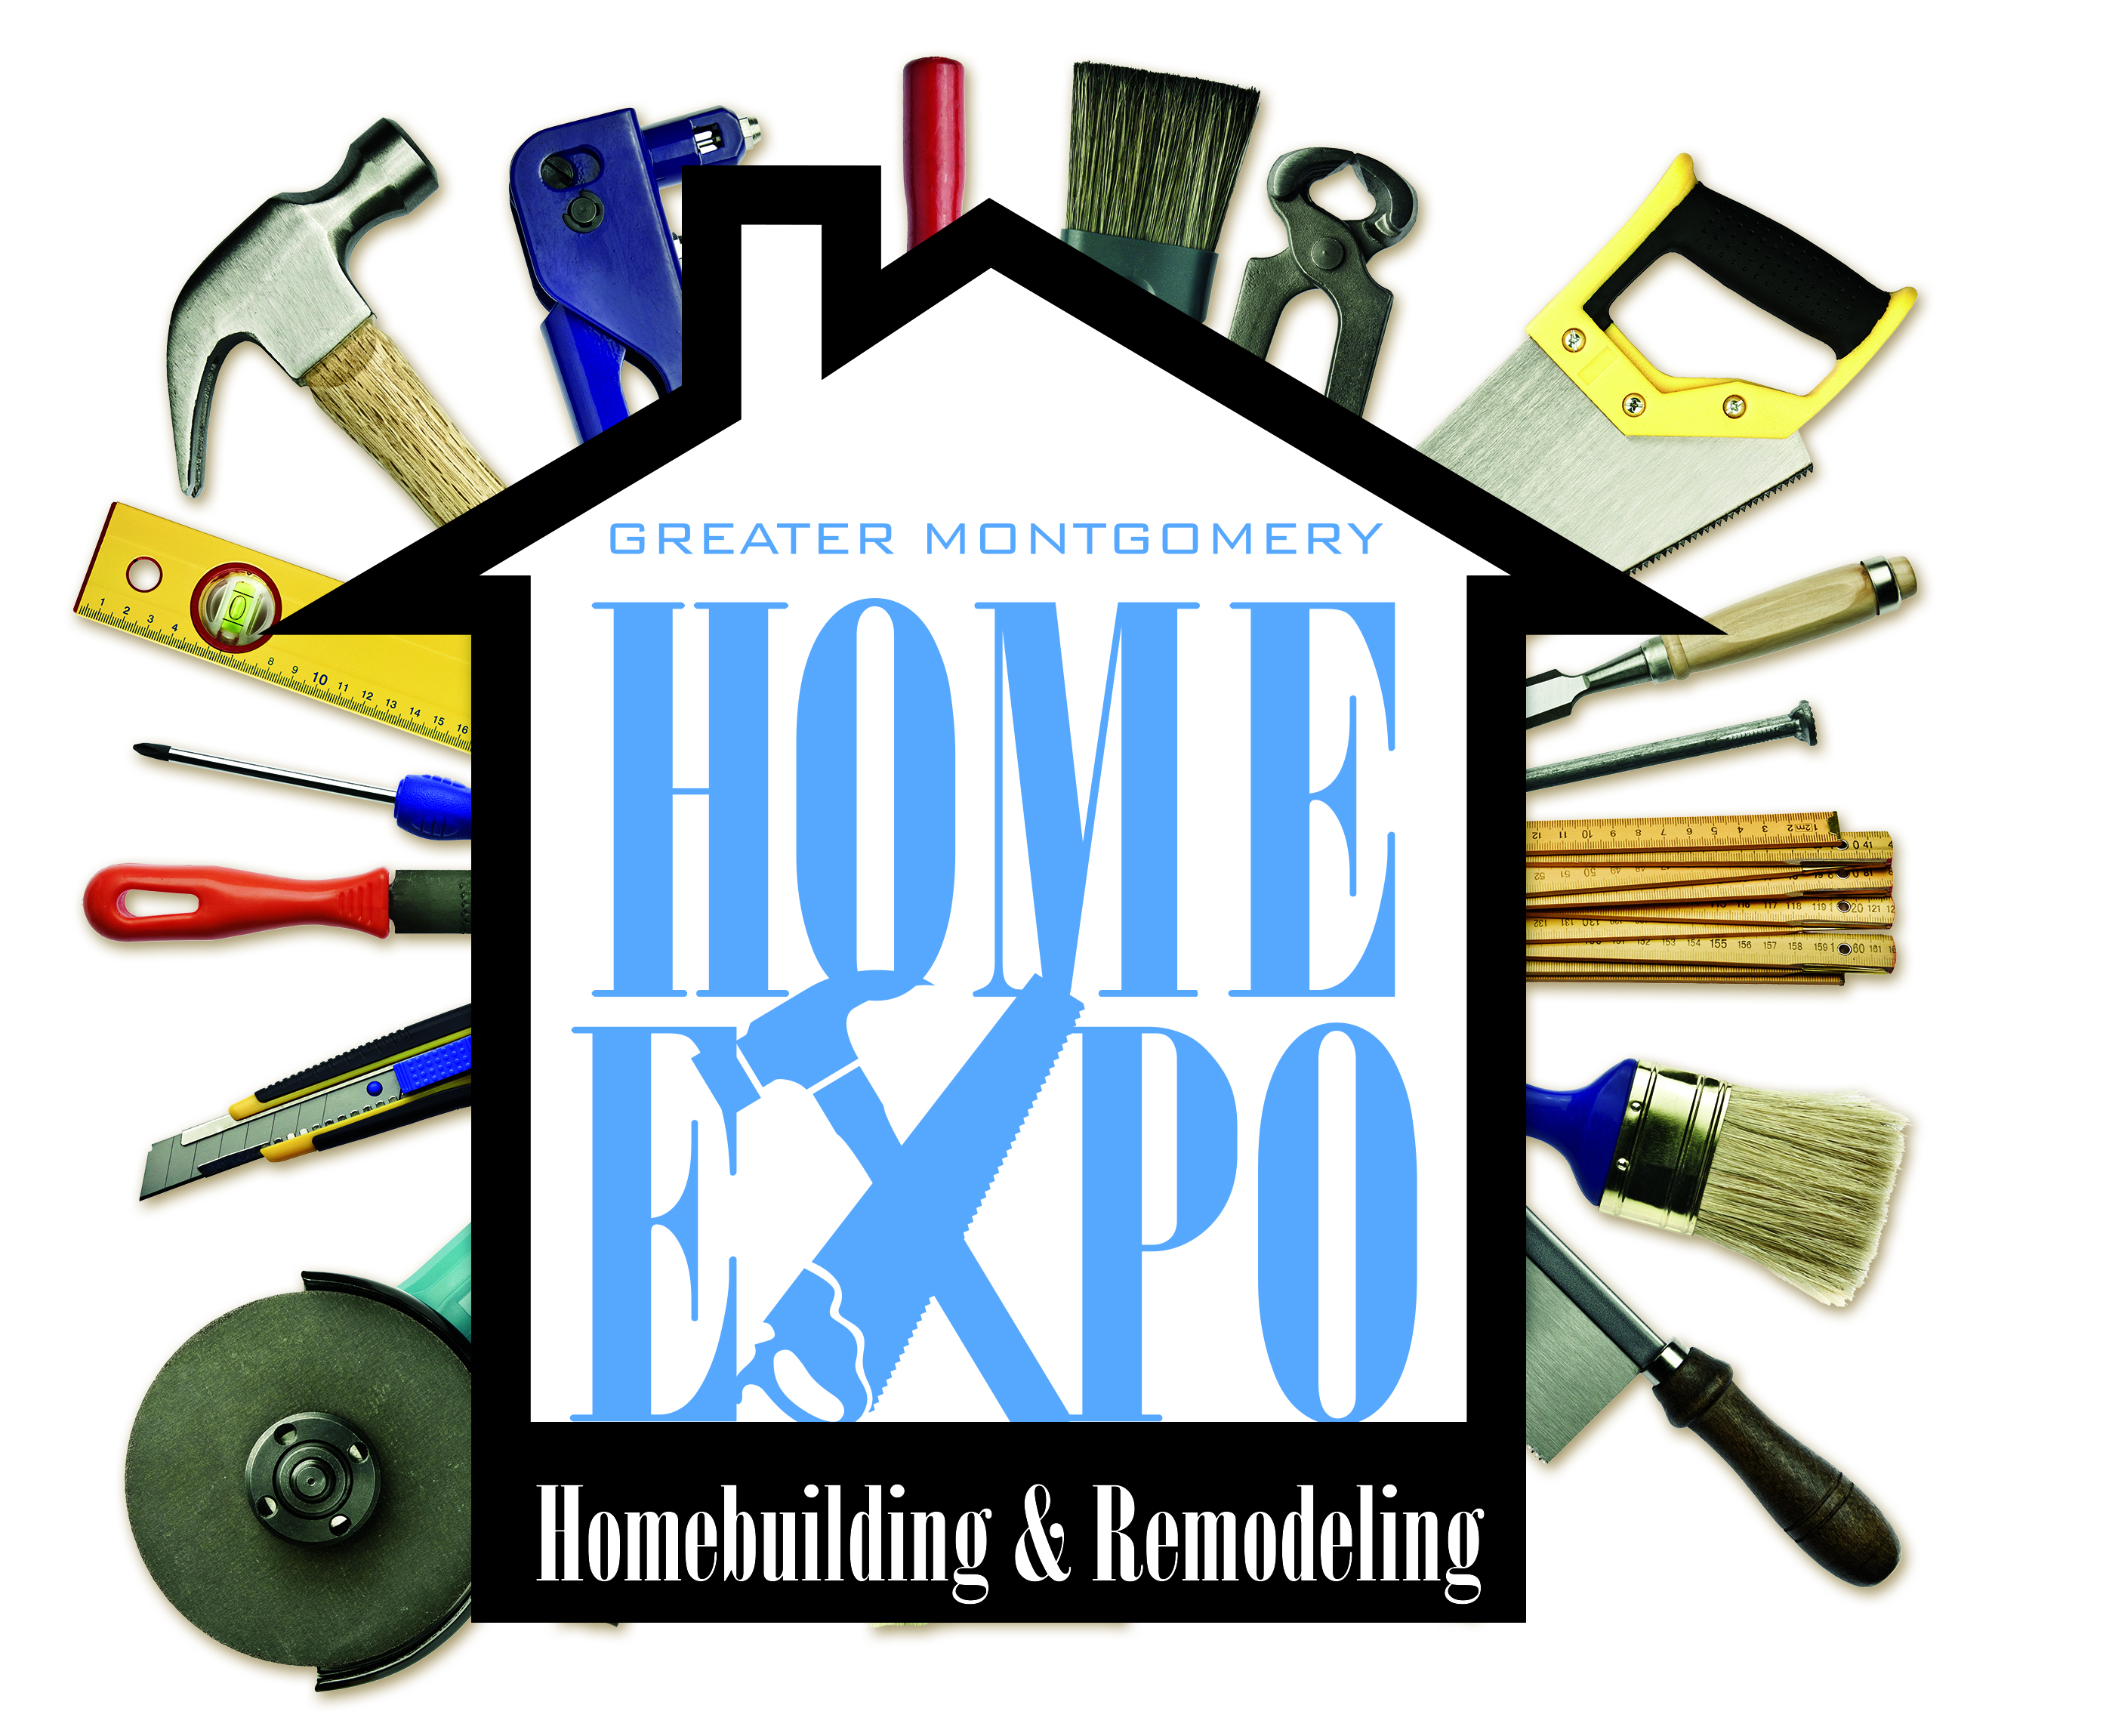 2019 Greater Montgomery Home Building and Remodeling Expo